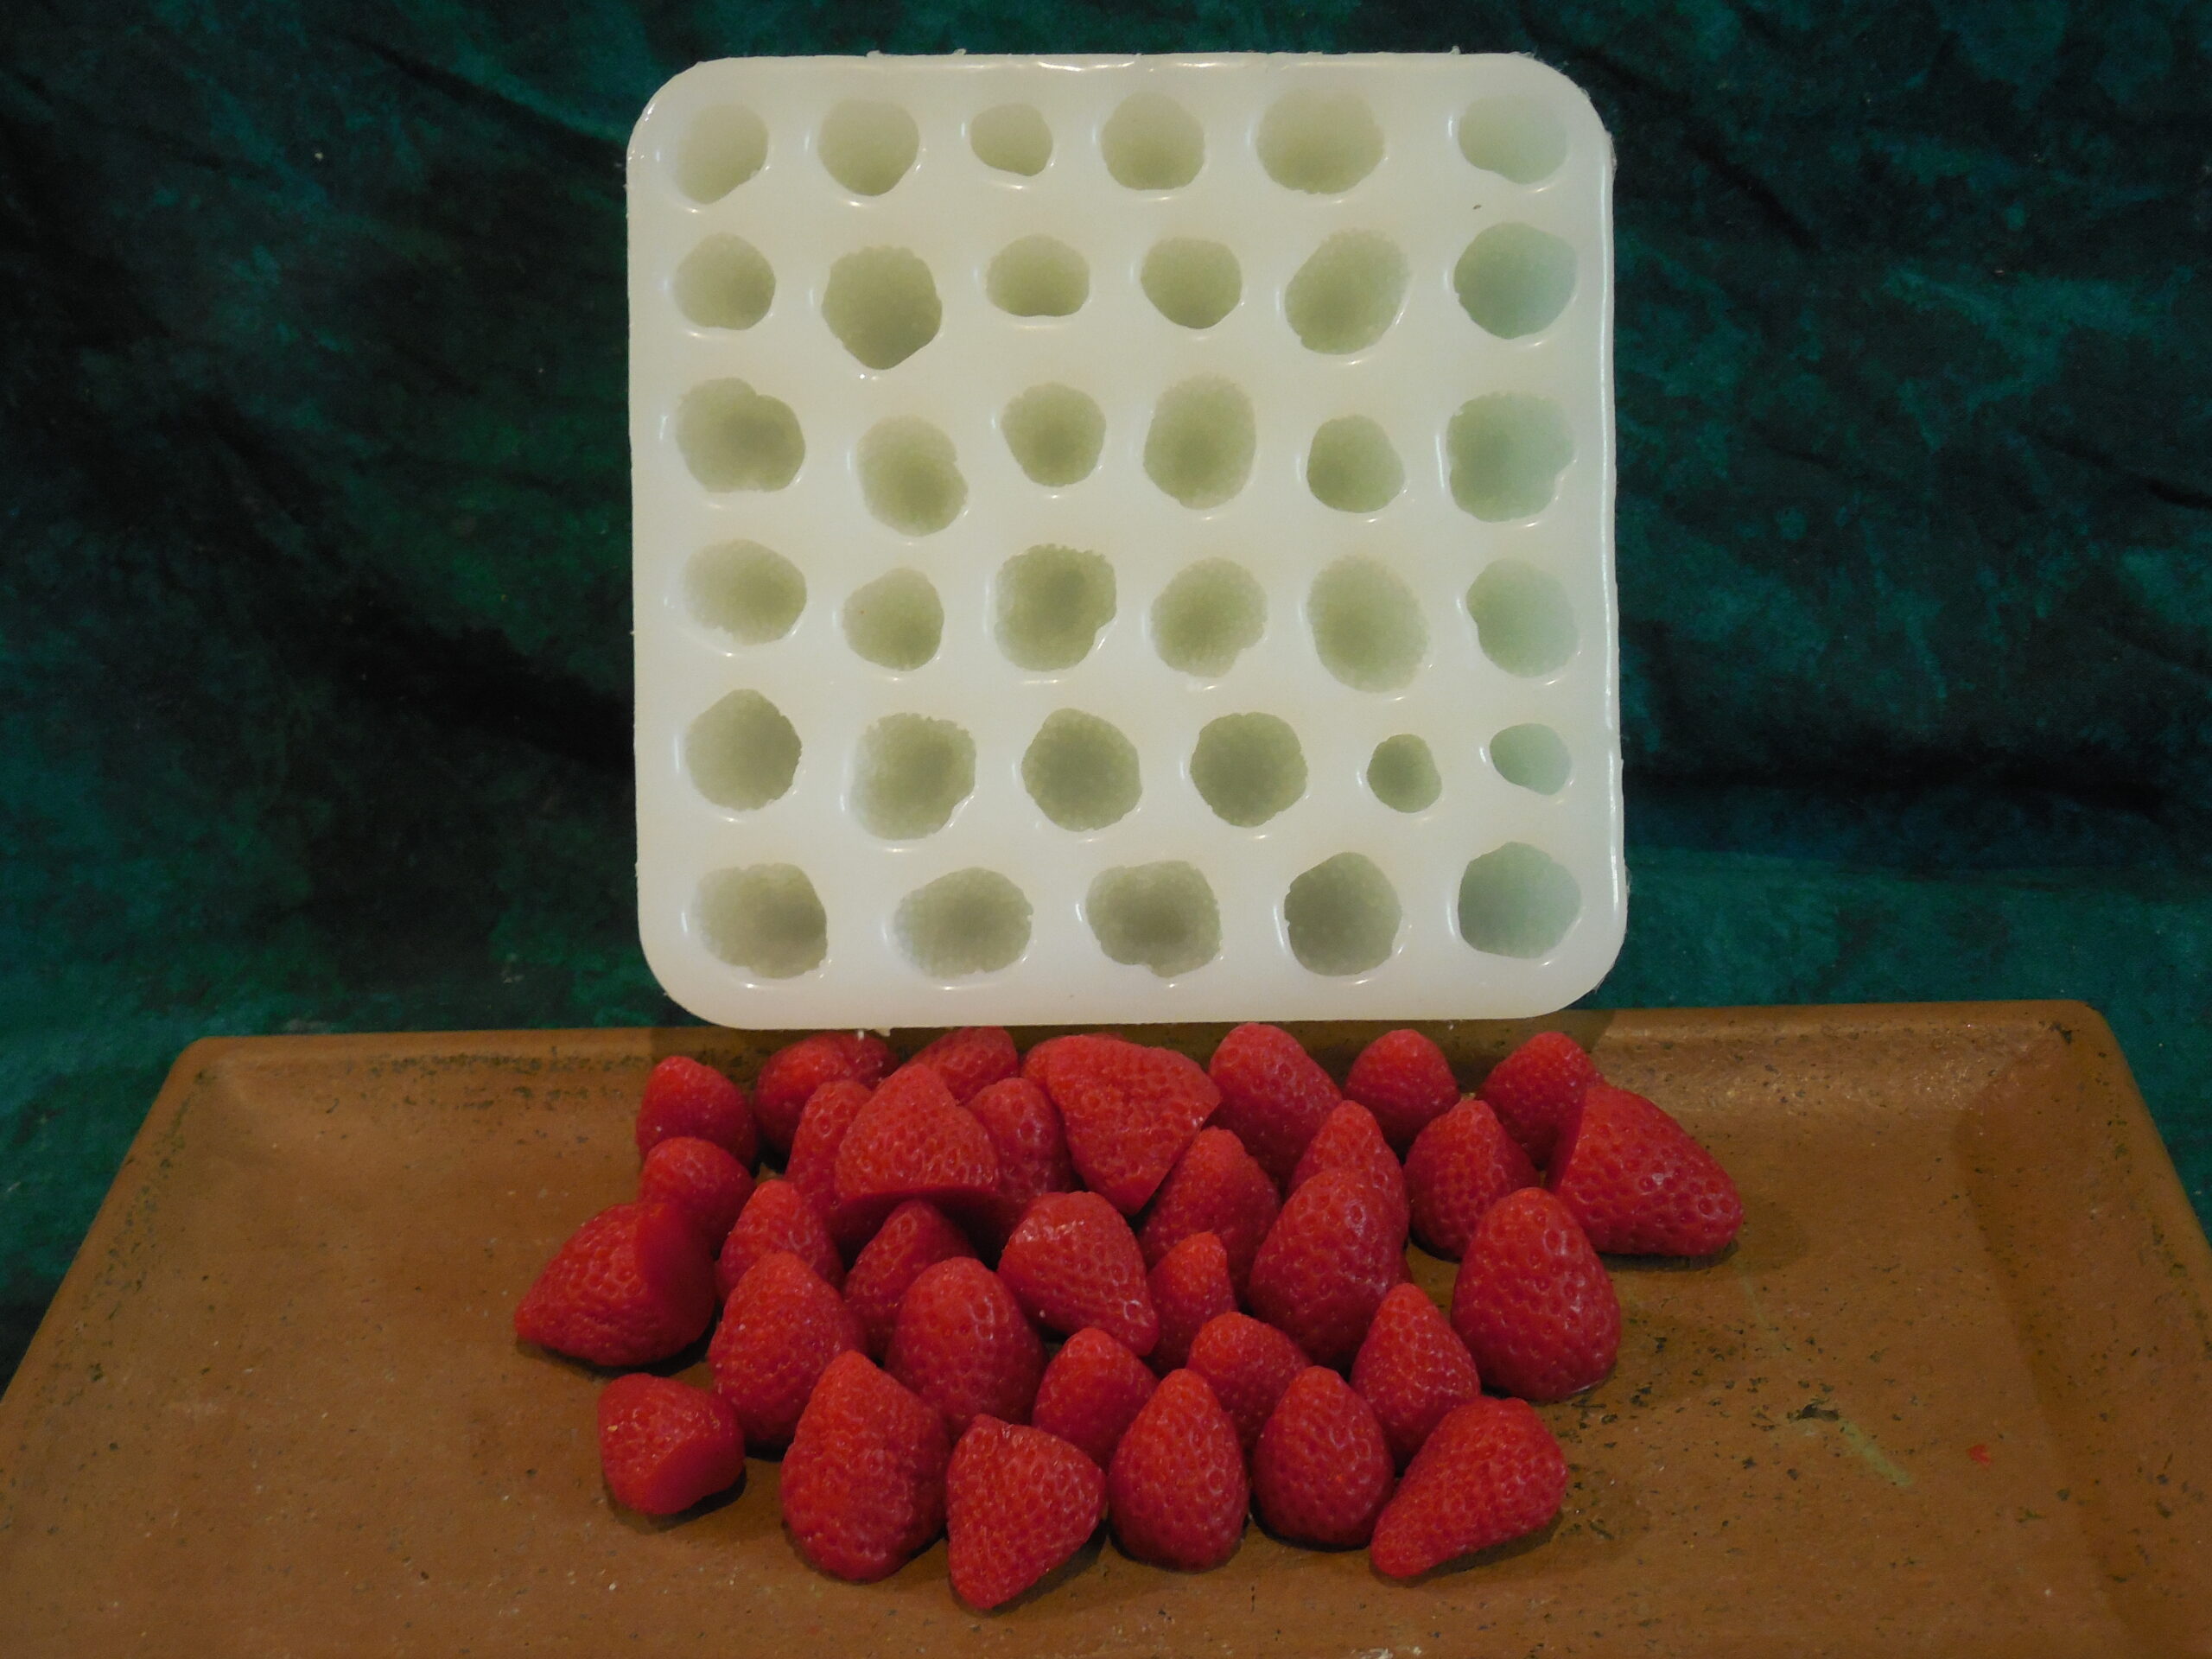 1pc 3D Strawberry Silicone Mold,Safety Silicon Materials for